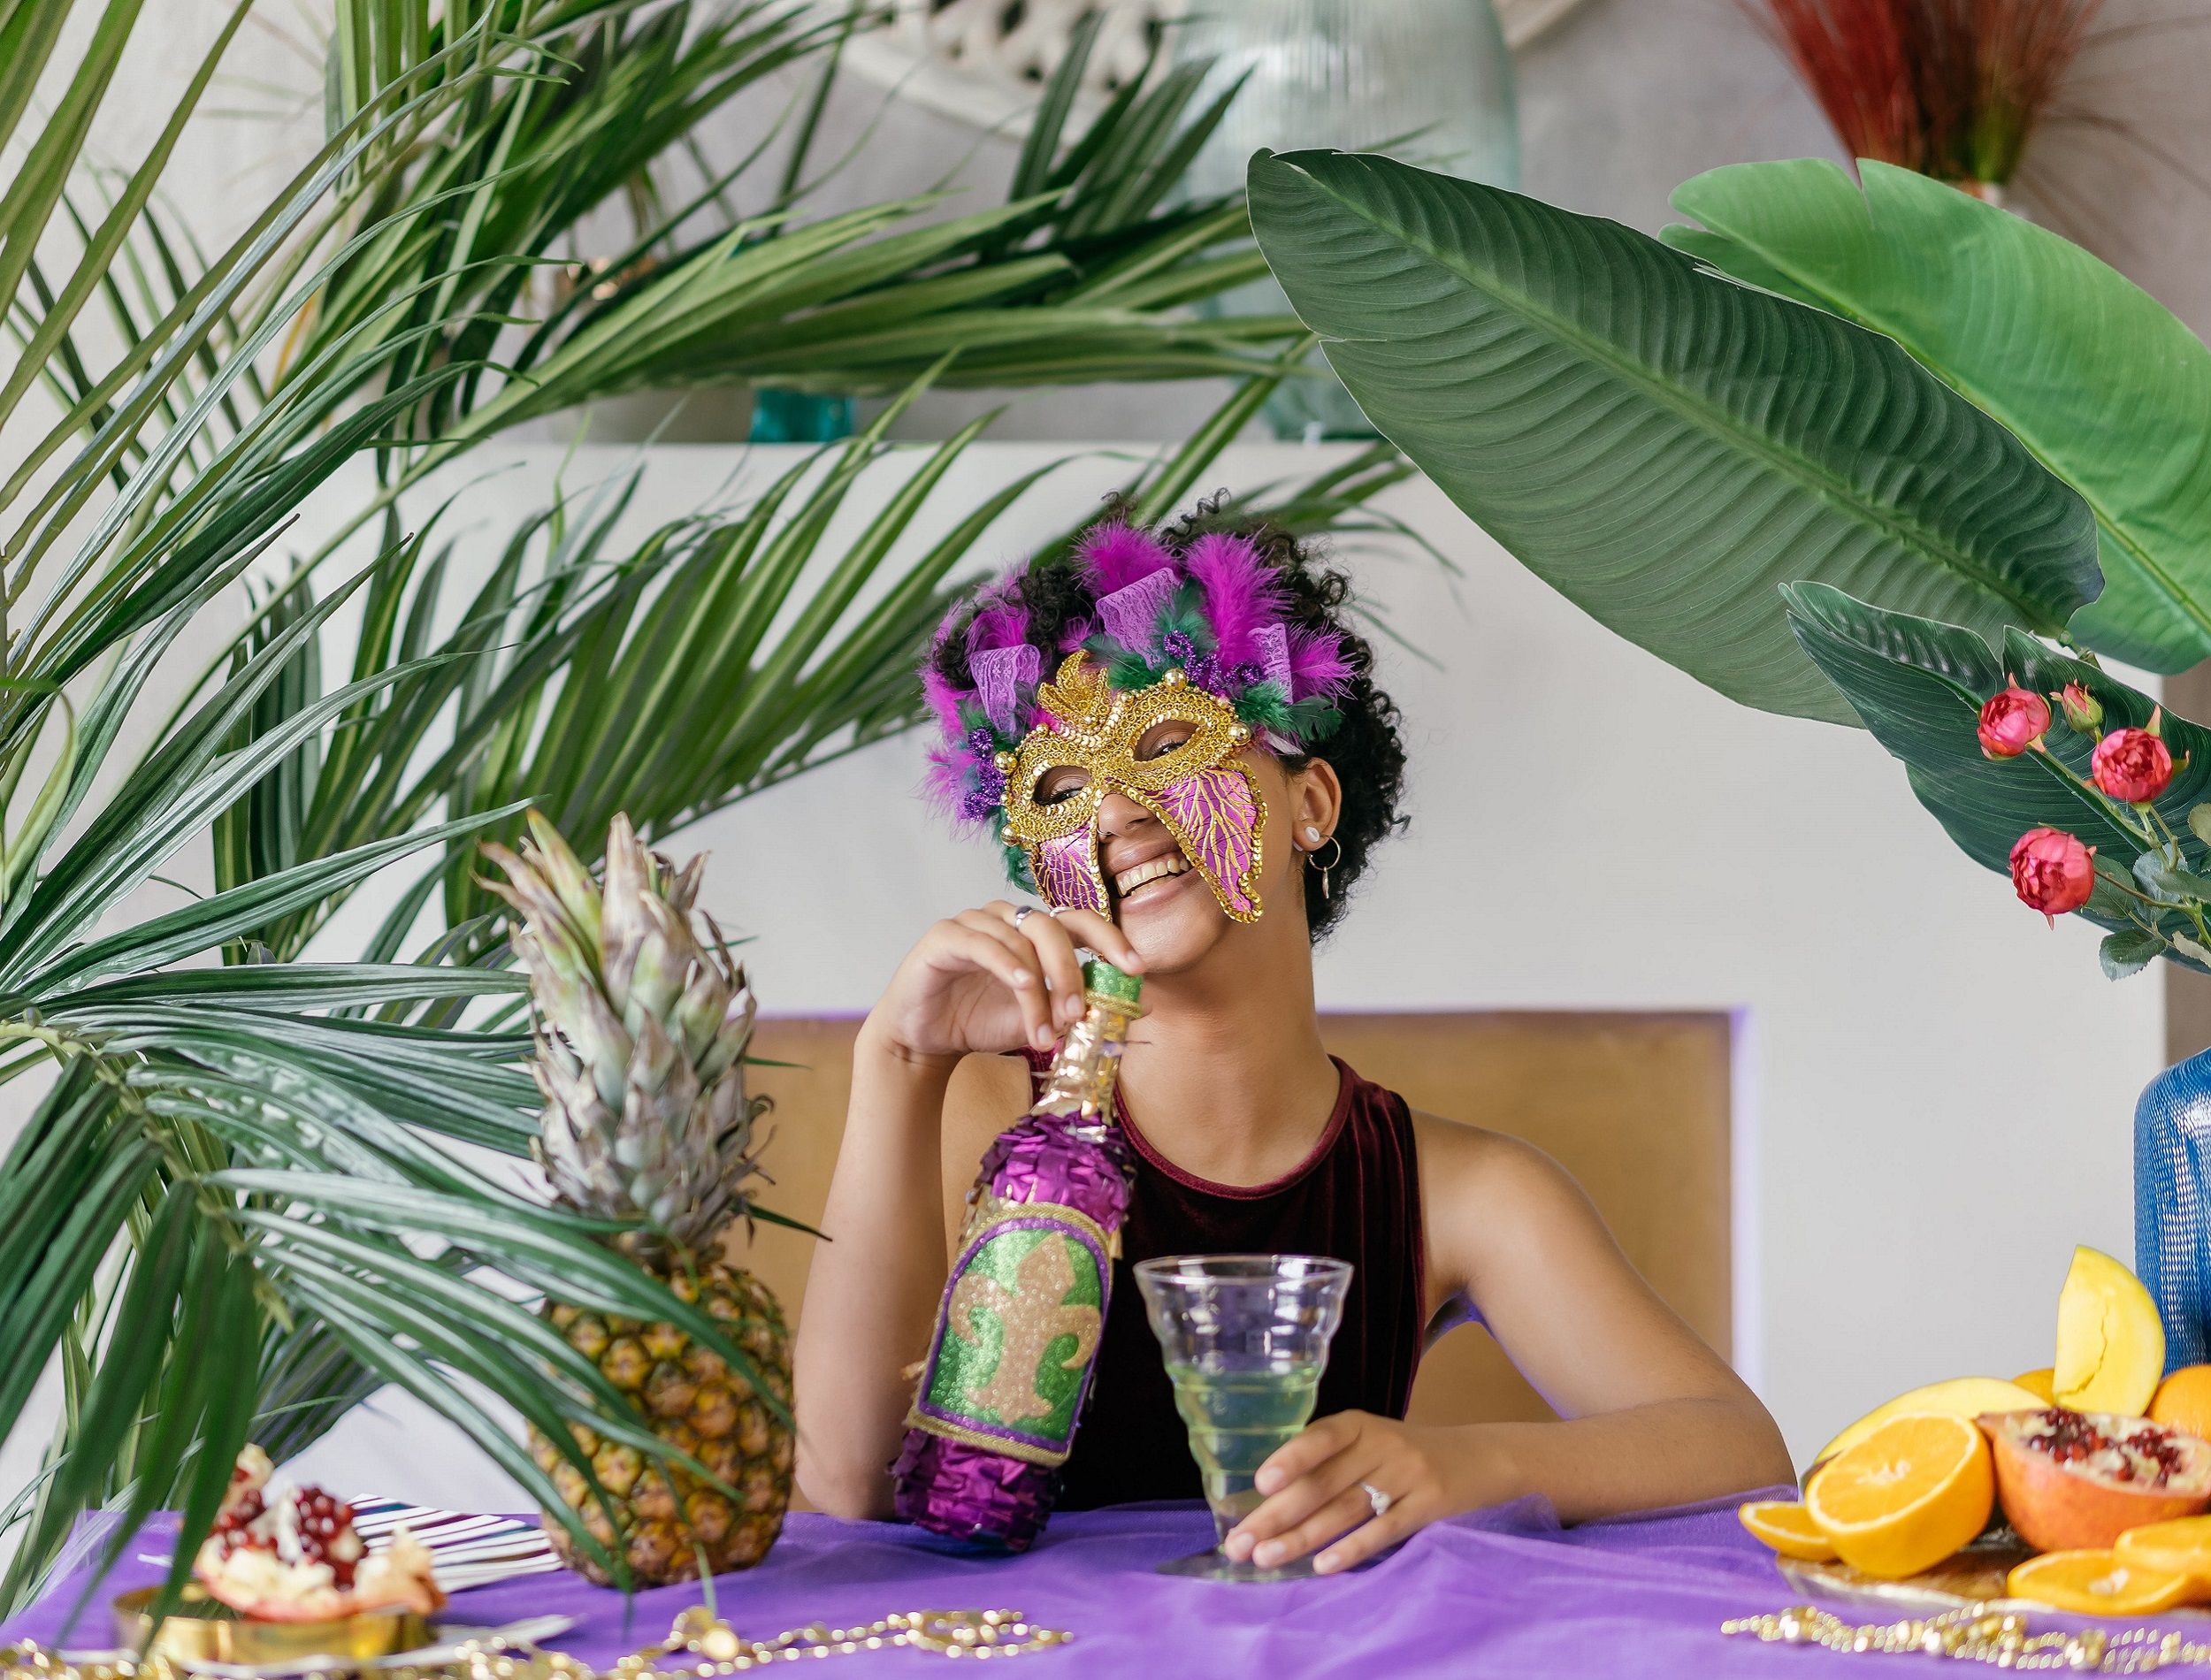 Mardi Gras party plant decor woman sitting at table with purple tablecloth